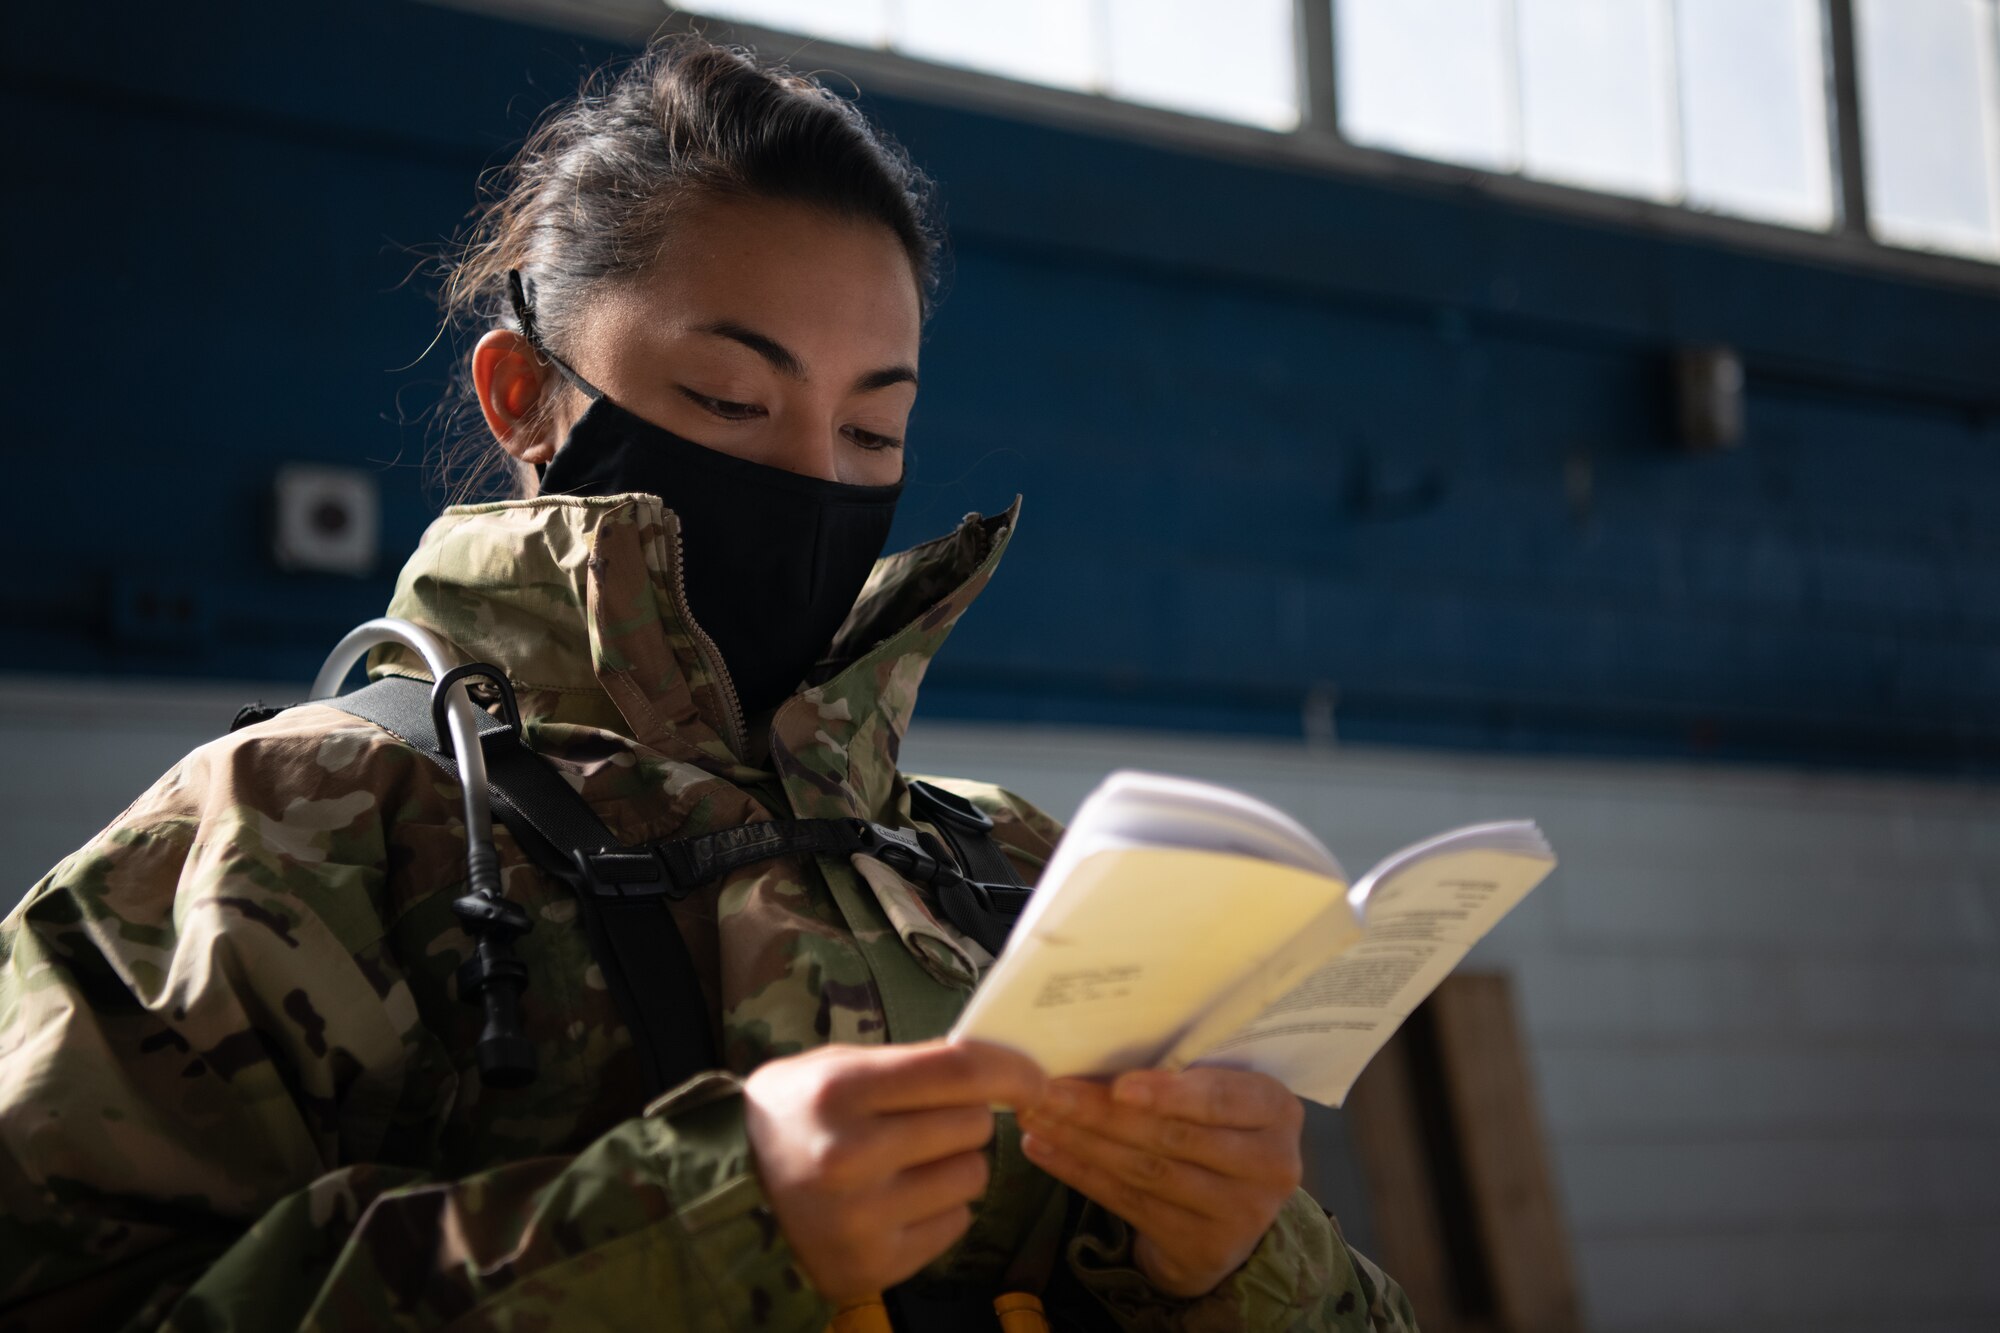 2nd Lt. Meggan Tamondong, an officer trainee at Officer Training School, reads an OTS manual while seated in the post-vaccination waiting area Jan. 16, 2020, at the off-site clinic in the Honor Guard hangar on Maxwell Air Force Base, Alabama. Patients were asked to remain in the hangar for an additional 30 minutes after receiving the vaccine so they could alert nursing staff if they had any concerns.